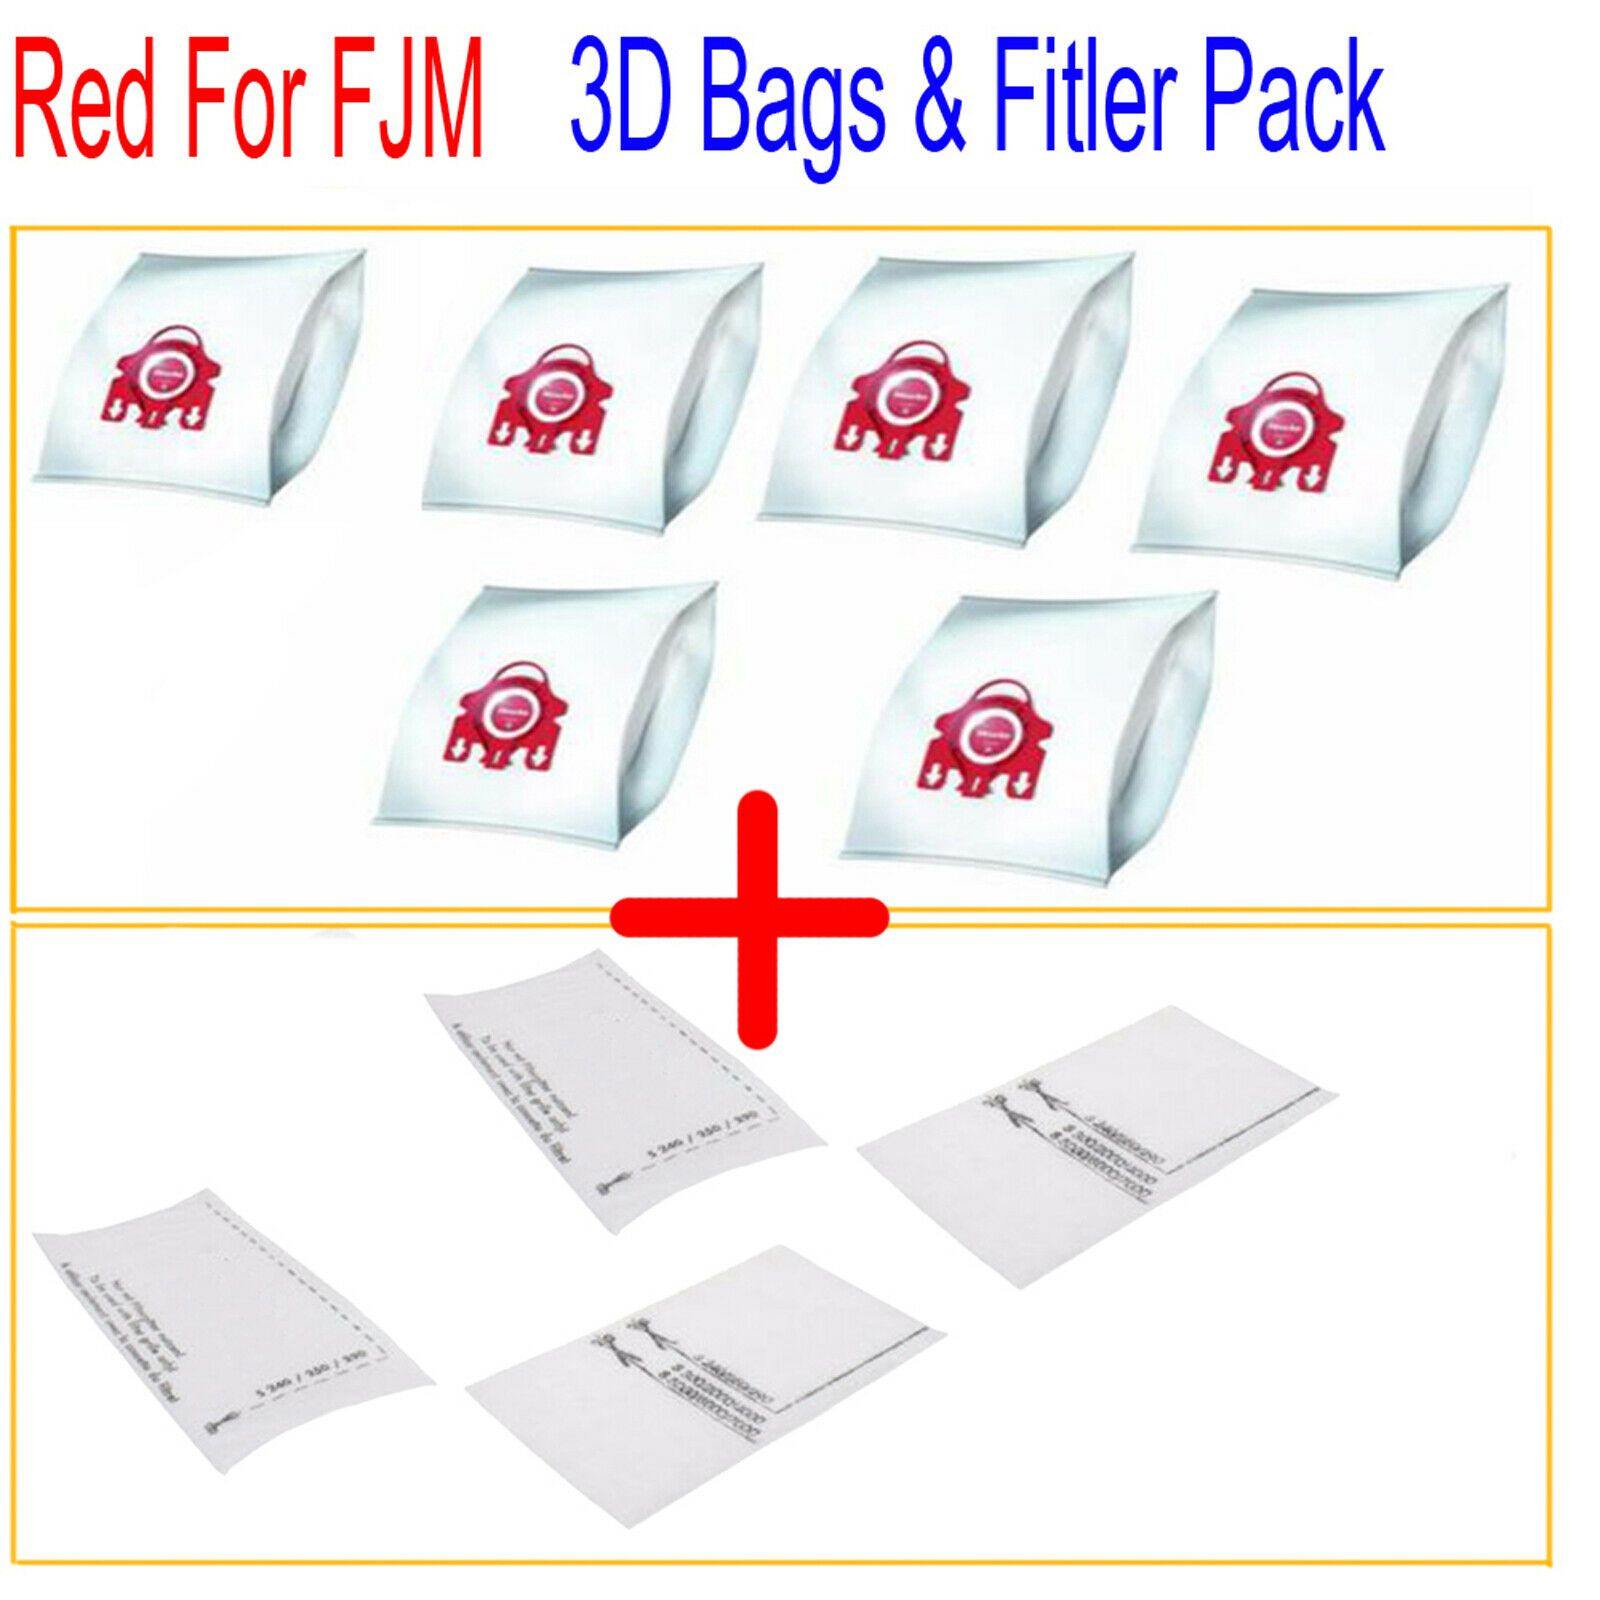 6 x Synthetic Dust Bags + 4 Filters For Miele S4210 Carina S4210 Capella S4211 Sparesbarn